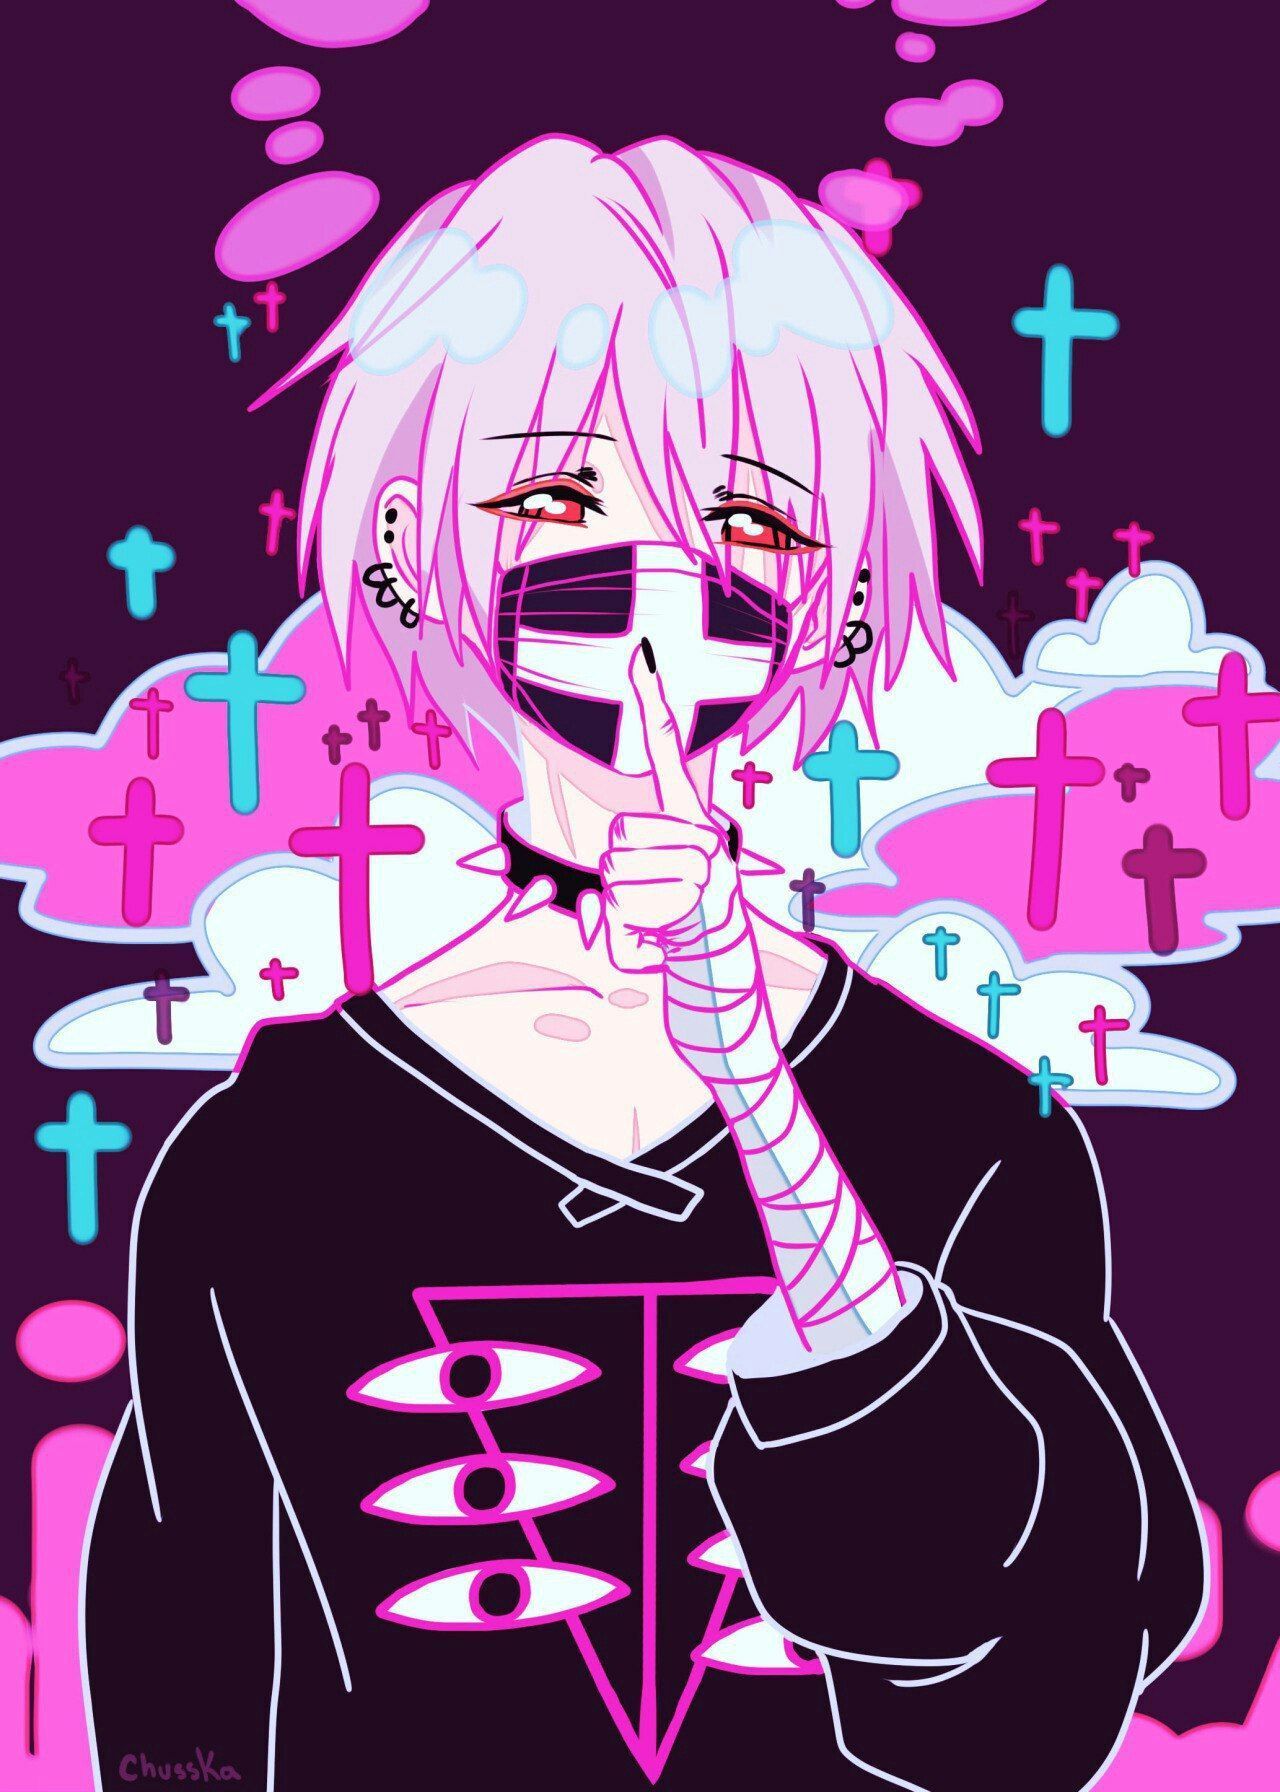 Pastel Goth Anime Wallpapers Wallpaper Cave The pastel goth juxtaposition of light and dark creates a creepy but cute vibe that you'll find overlaps with our collections of kawaii clothing and gothic clothing for a unique and truly instagrammable look. pastel goth anime wallpapers